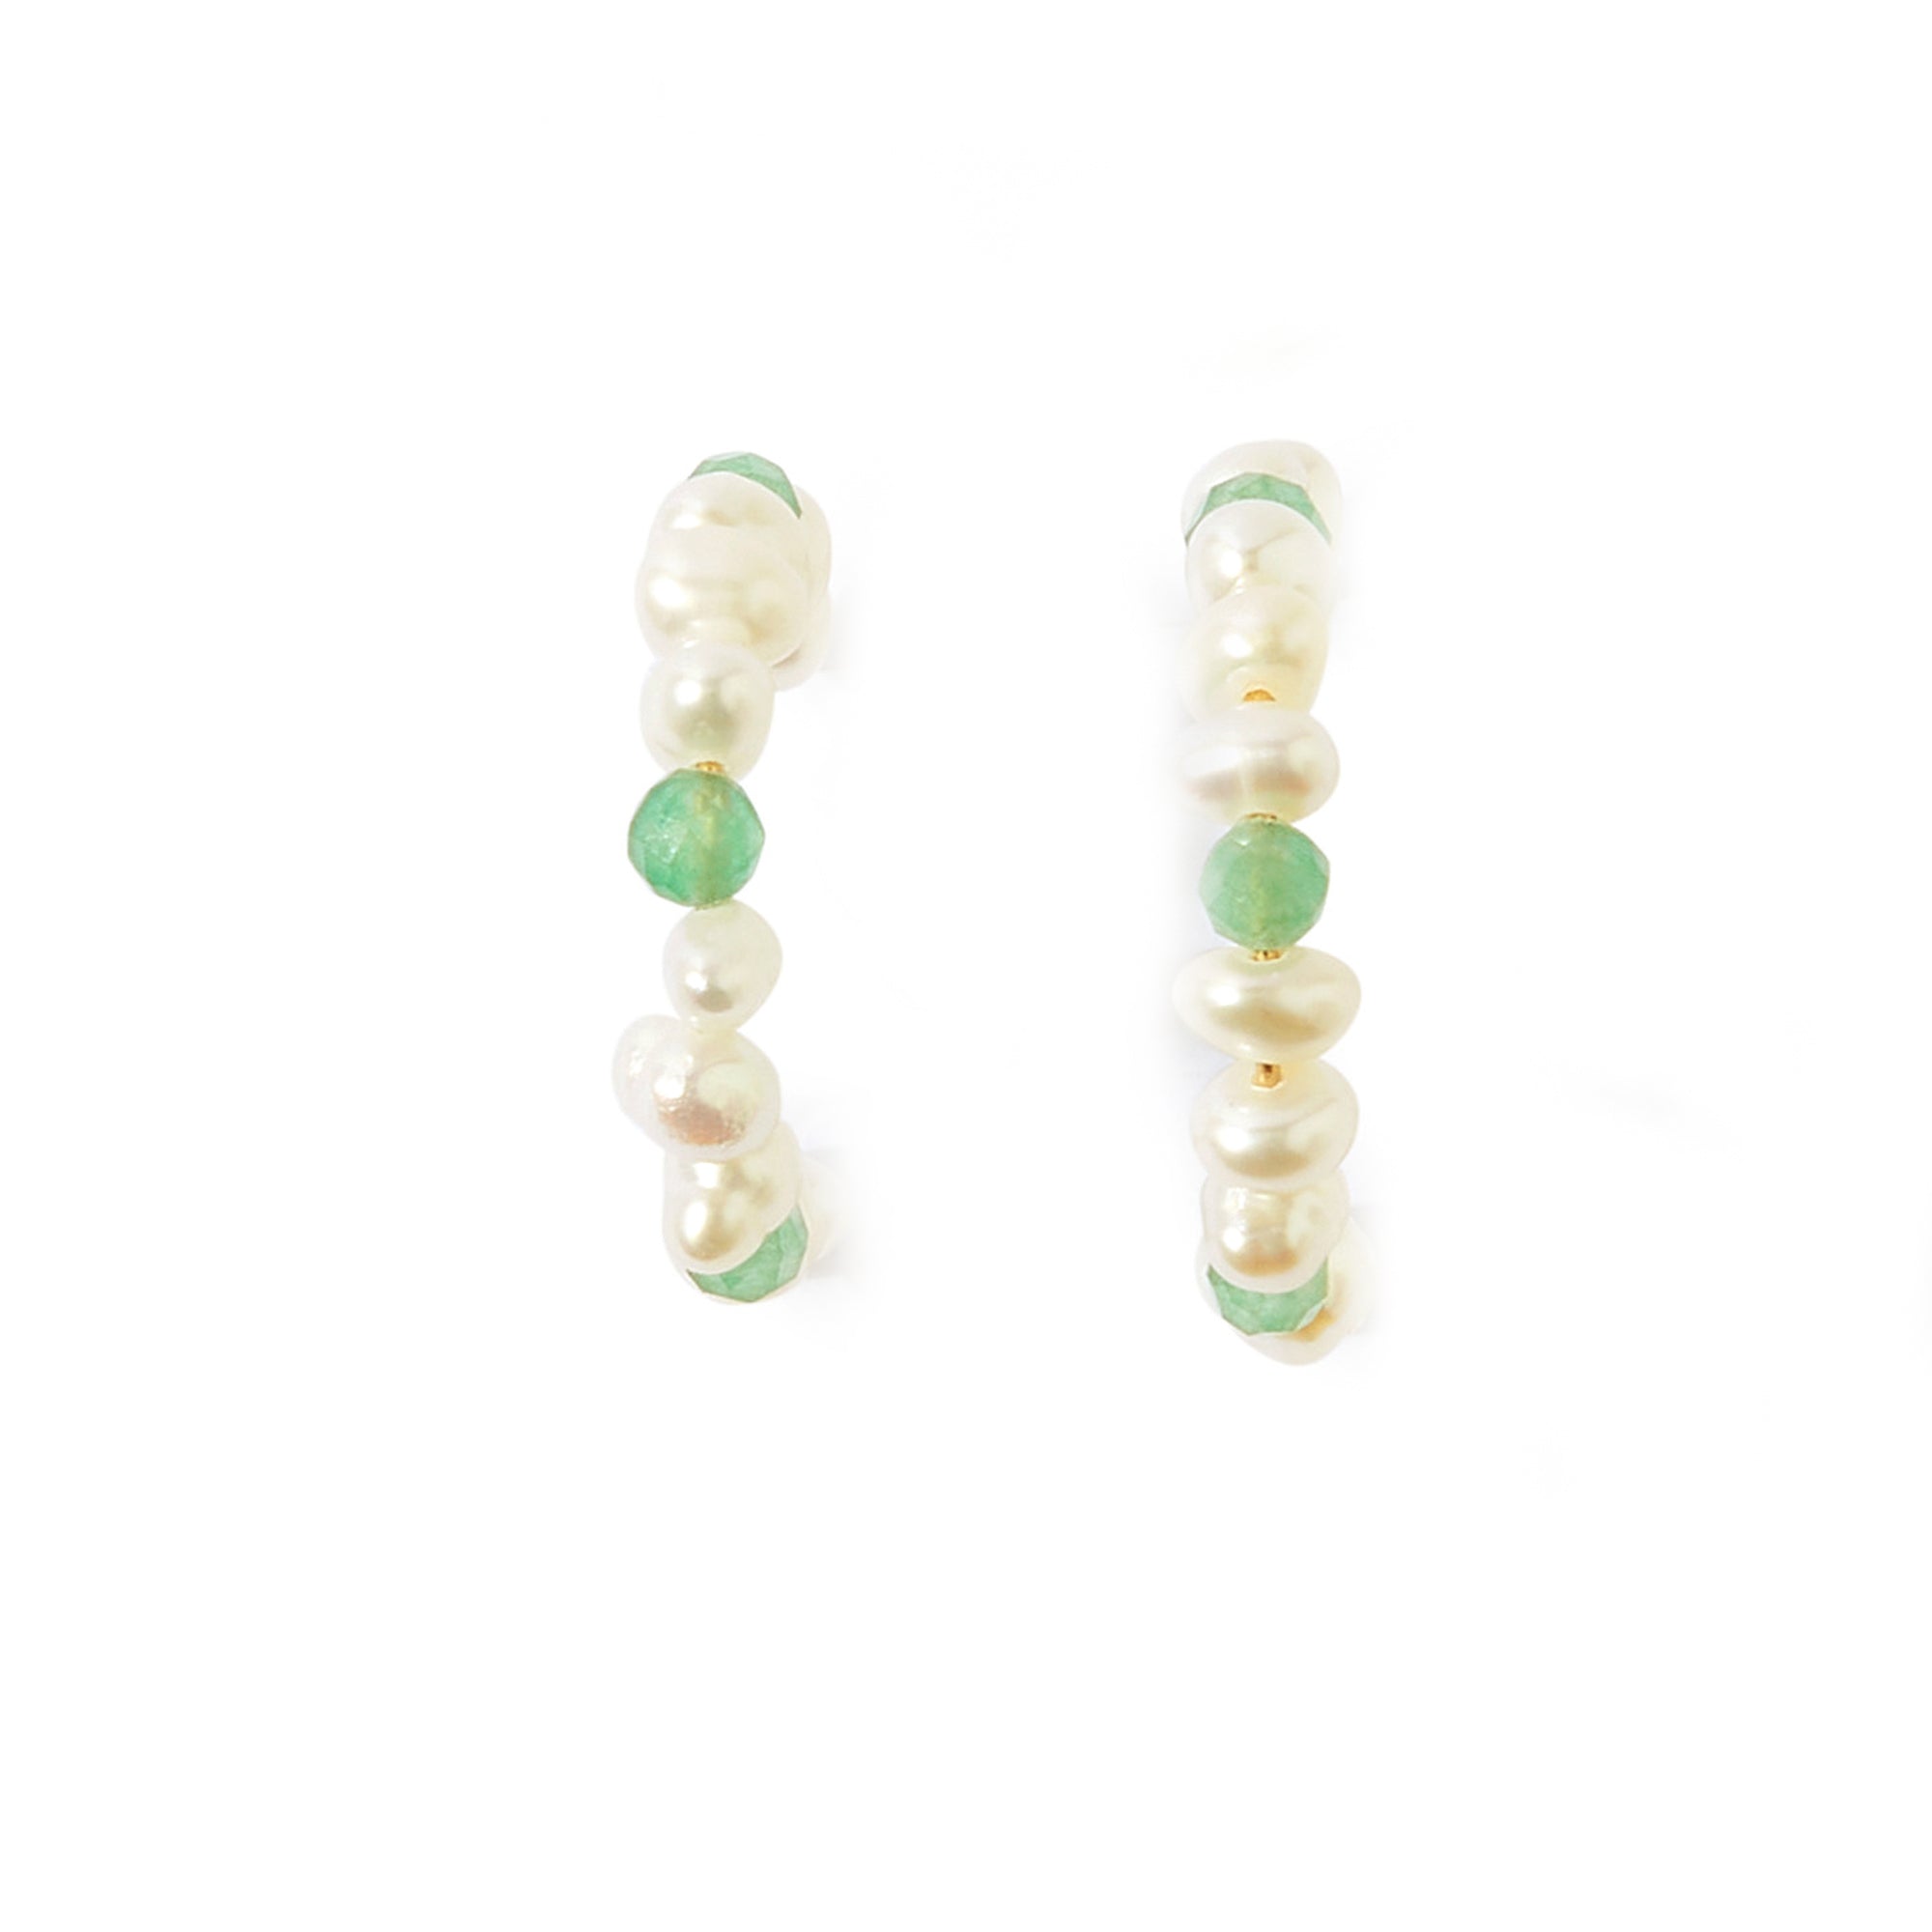 Real Gold Plated Pearl And Aventurine Hoop Earrings For Women By Accessorize London